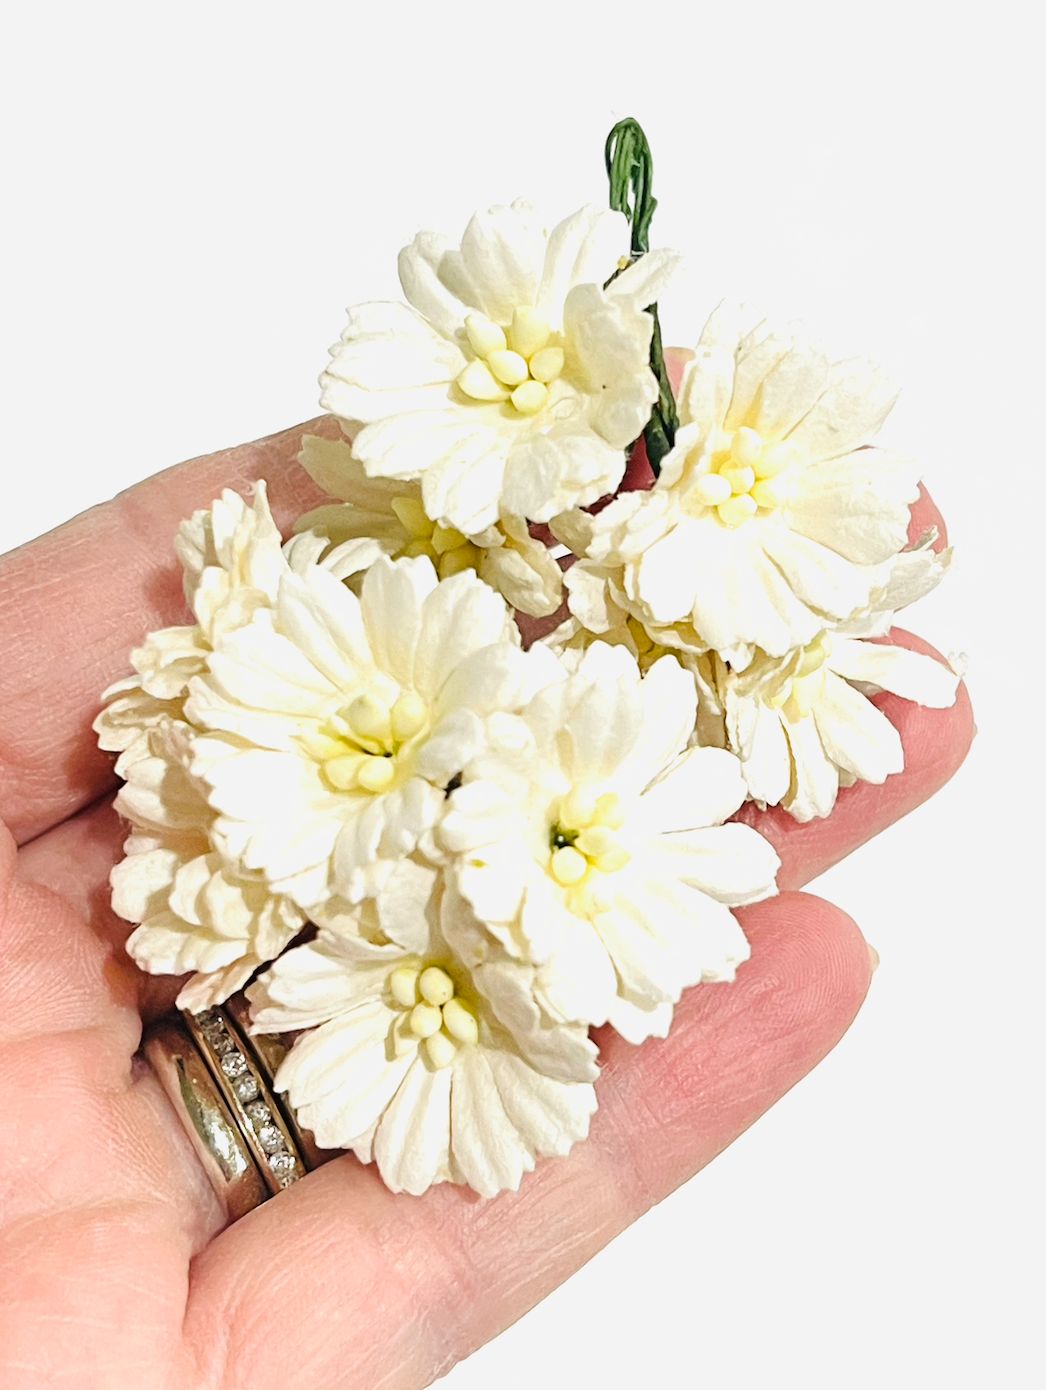 10 Stems White Mulberry Cosmos Daisies Paper Flowers - 25mm